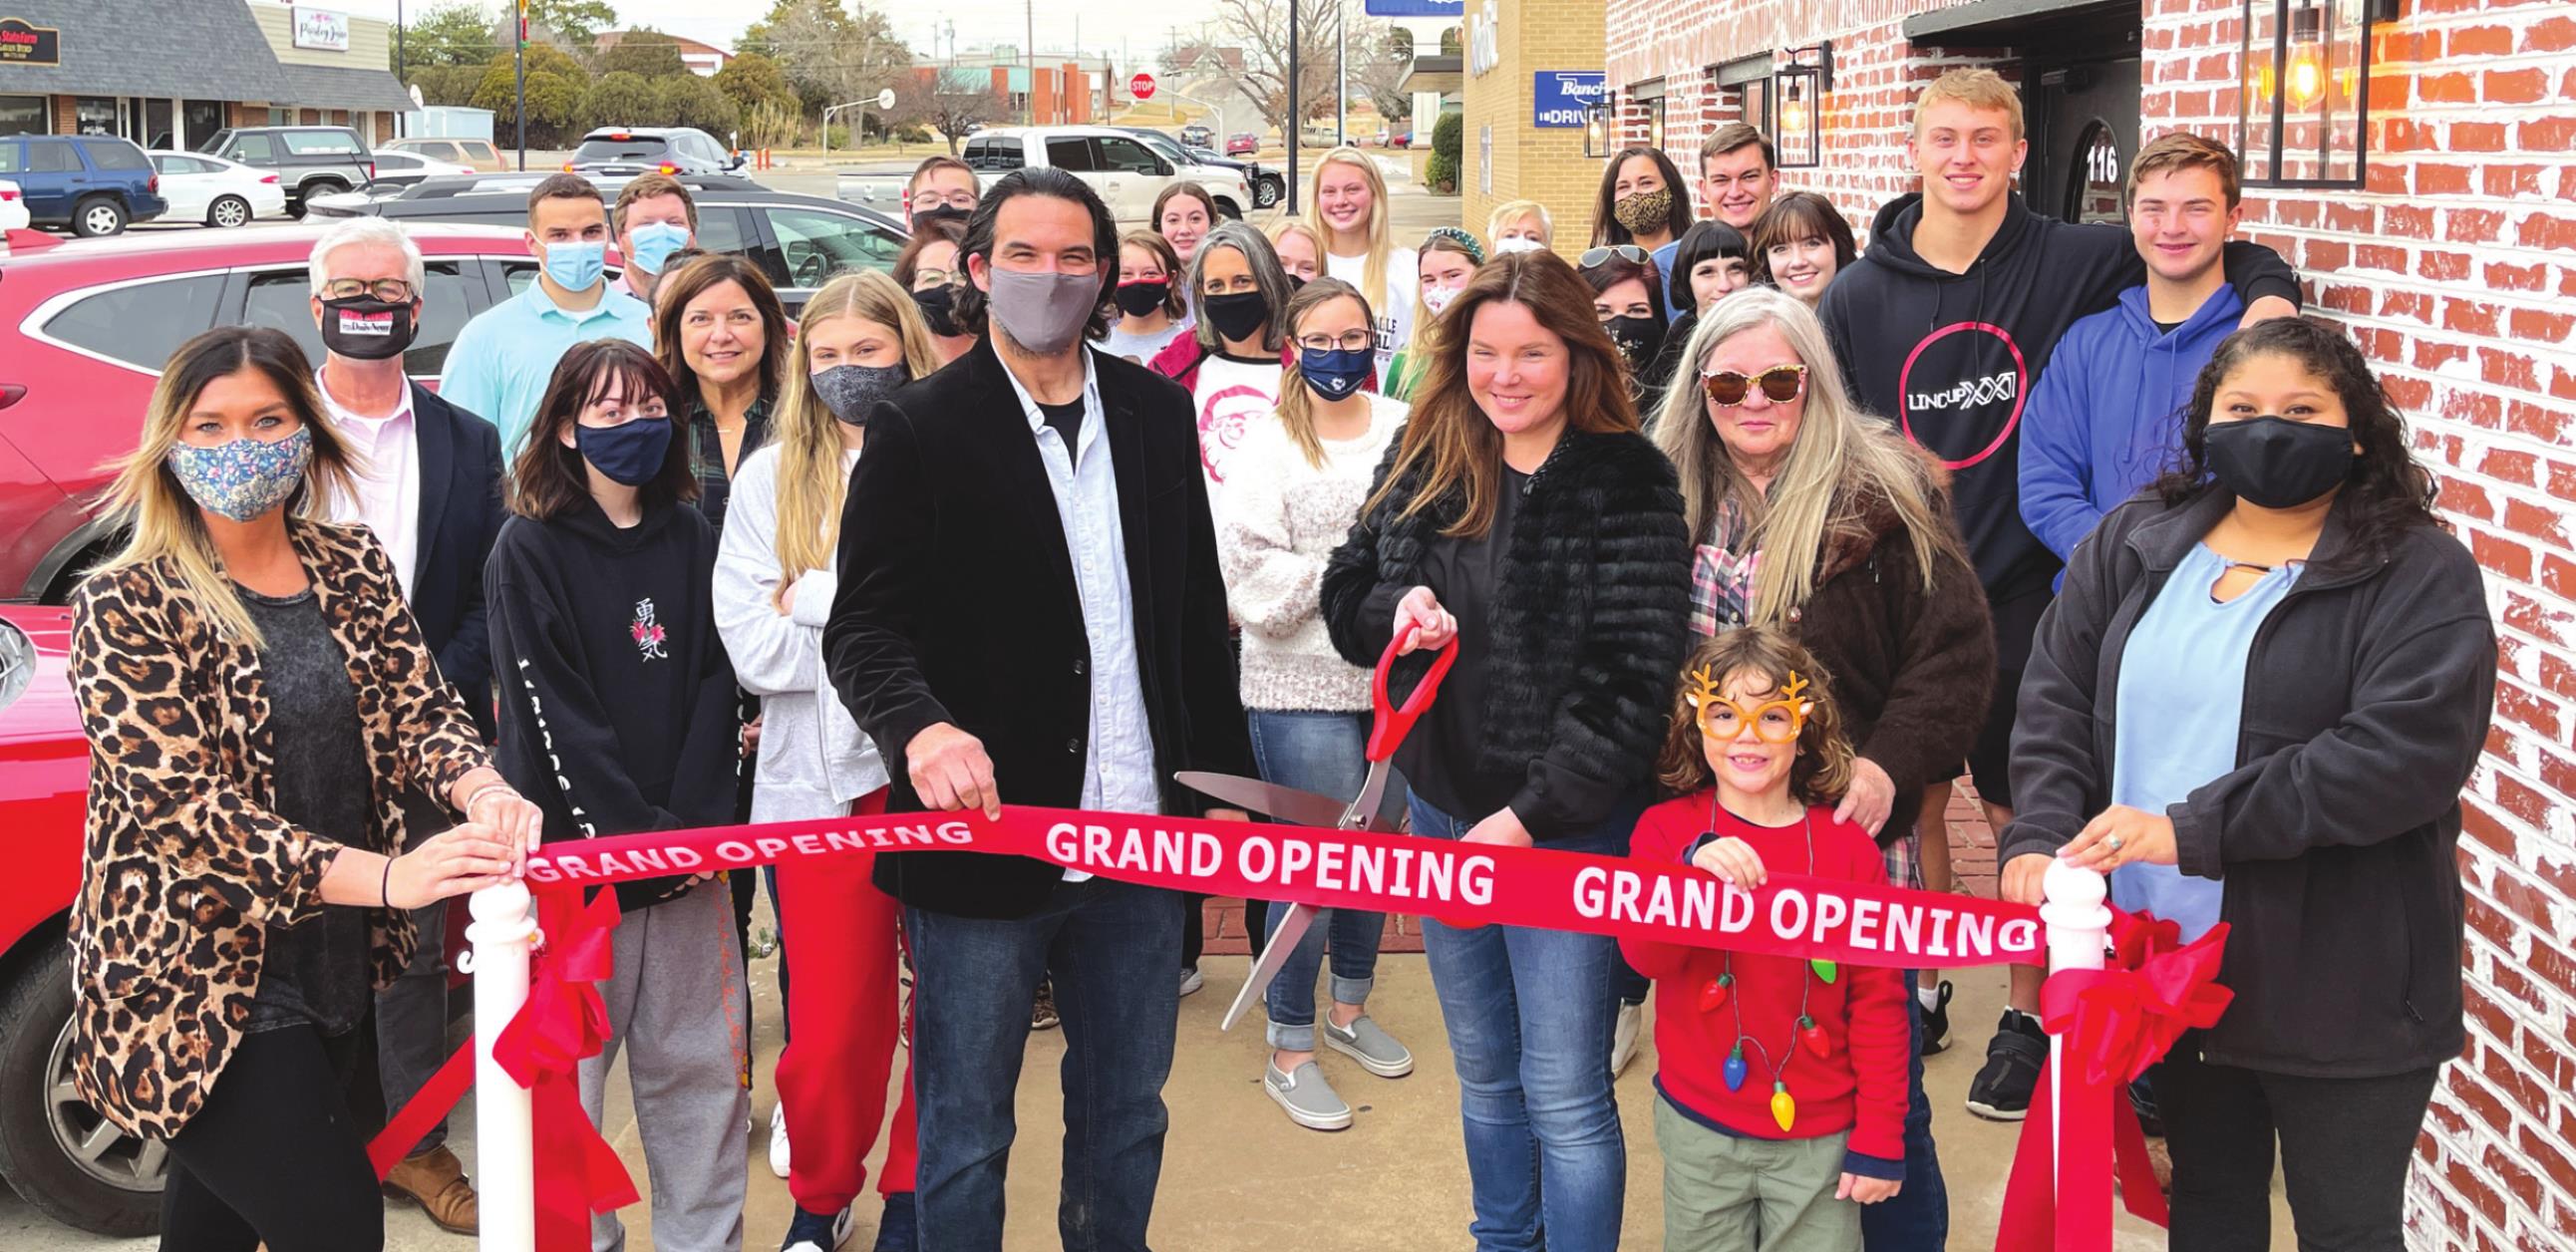 Broadway &amp; Main ArtHouse celebrates its ribbon cutting Friday in Weatherford. Owner Ashby de la Plaine will offer classes for acting, writing, filmmaking, photography and modeling. For more information, (580) 890-1114. The business is located at 114 N. Broadway. Timothy Comstock/WDN